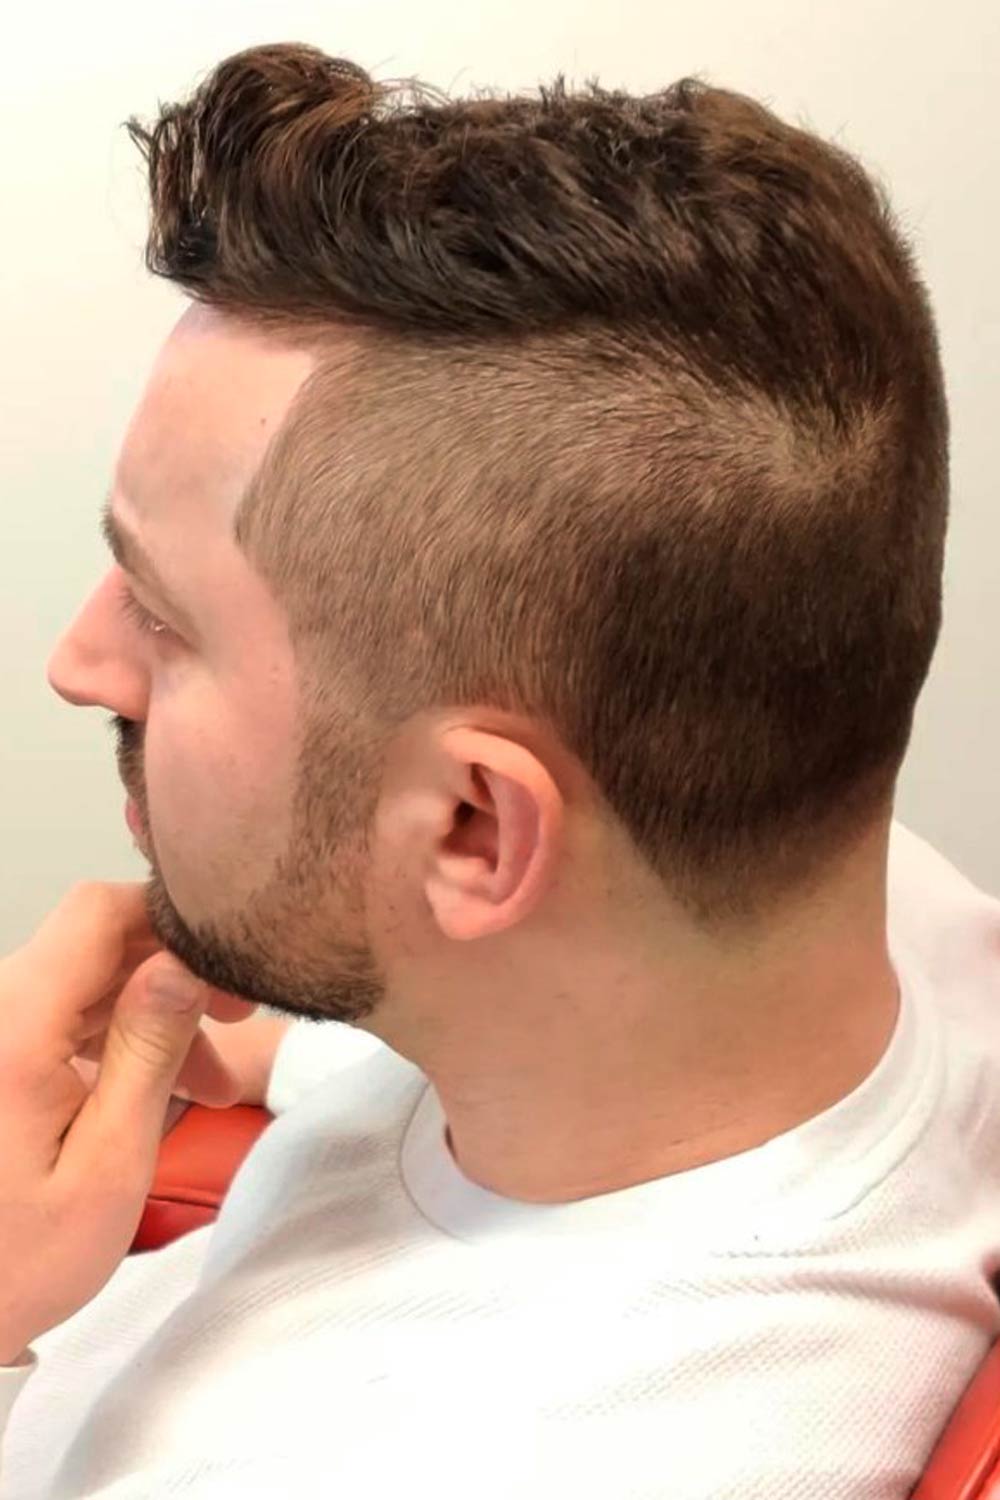 Tips For Styling A Mohawk Fade